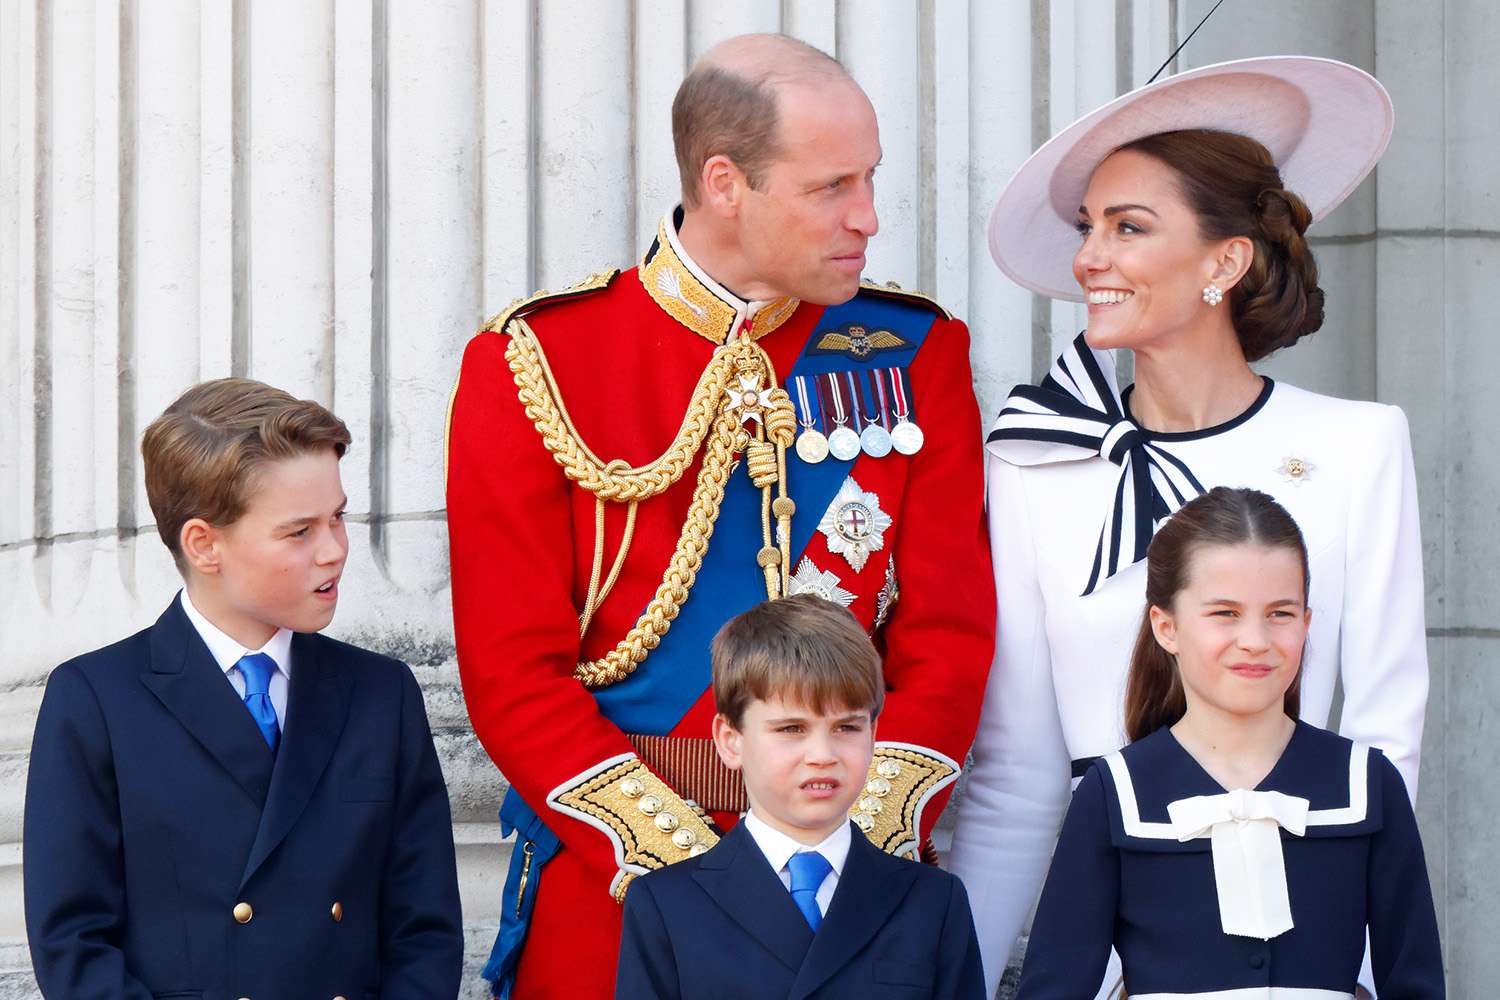 Prince George of Wales, Prince William, Prince of Wales (Colonel of the Welsh Guards), Prince Louis of Wales, Princess Charlotte of Wales and Catherine, Princess of Wales watch an RAF flypast from the balcony of Buckingham Palace 